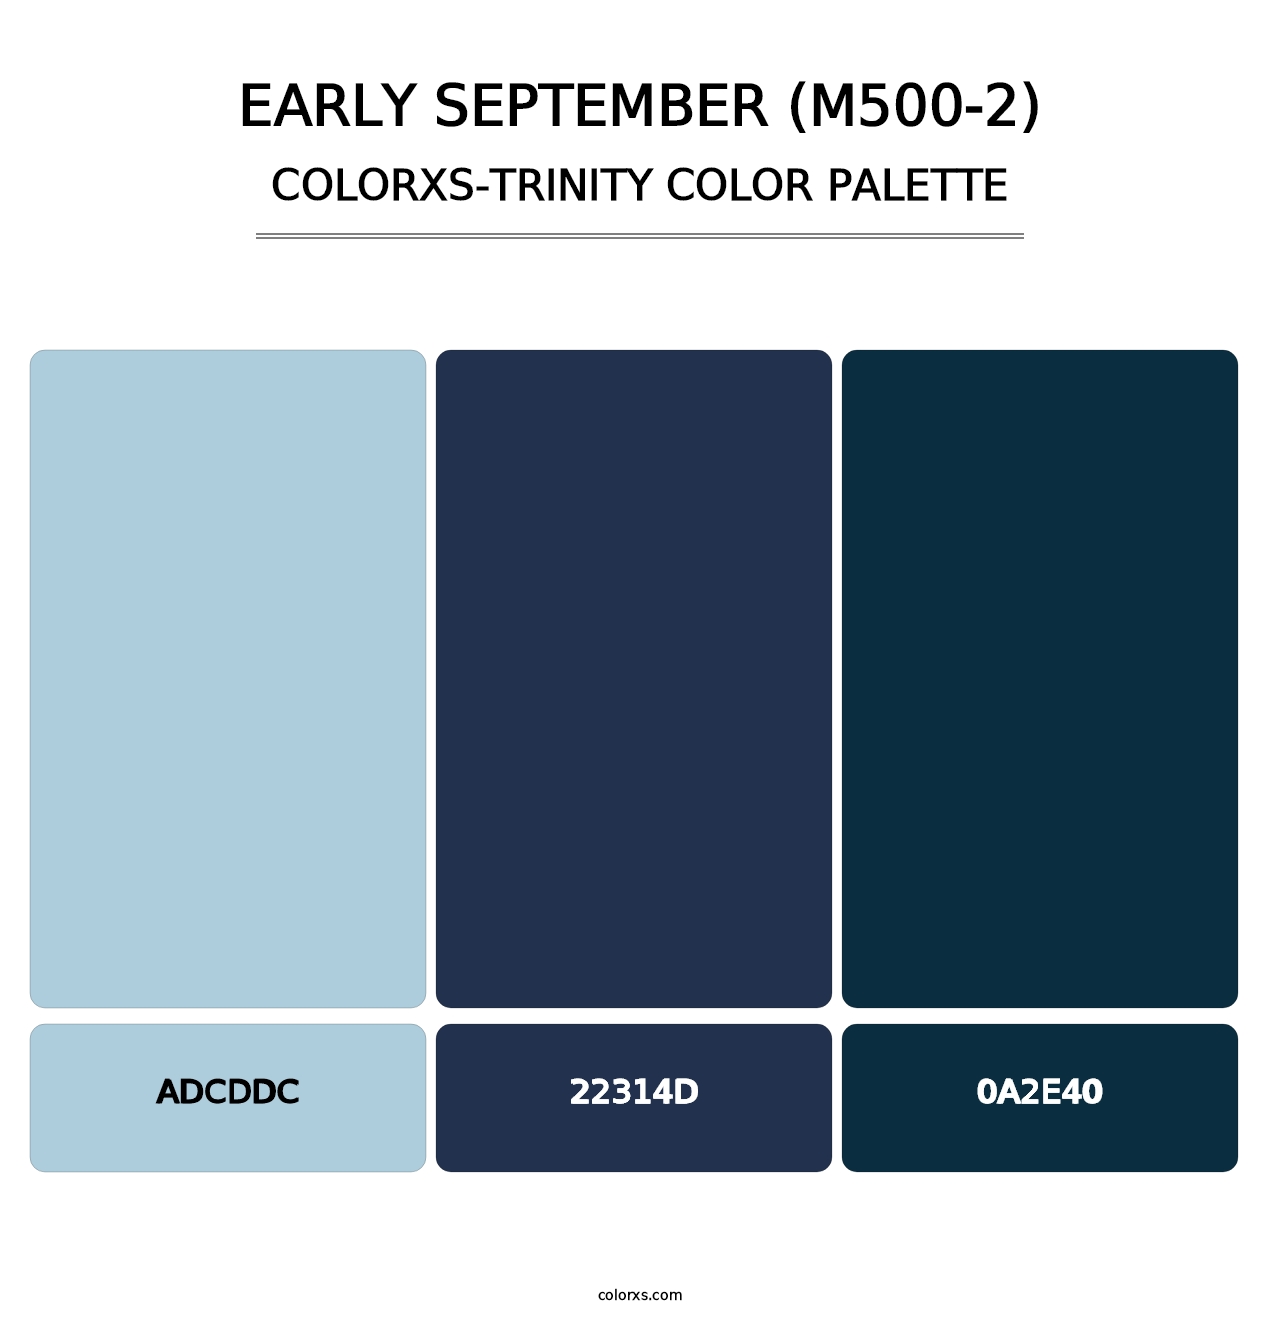 Early September (M500-2) - Colorxs Trinity Palette